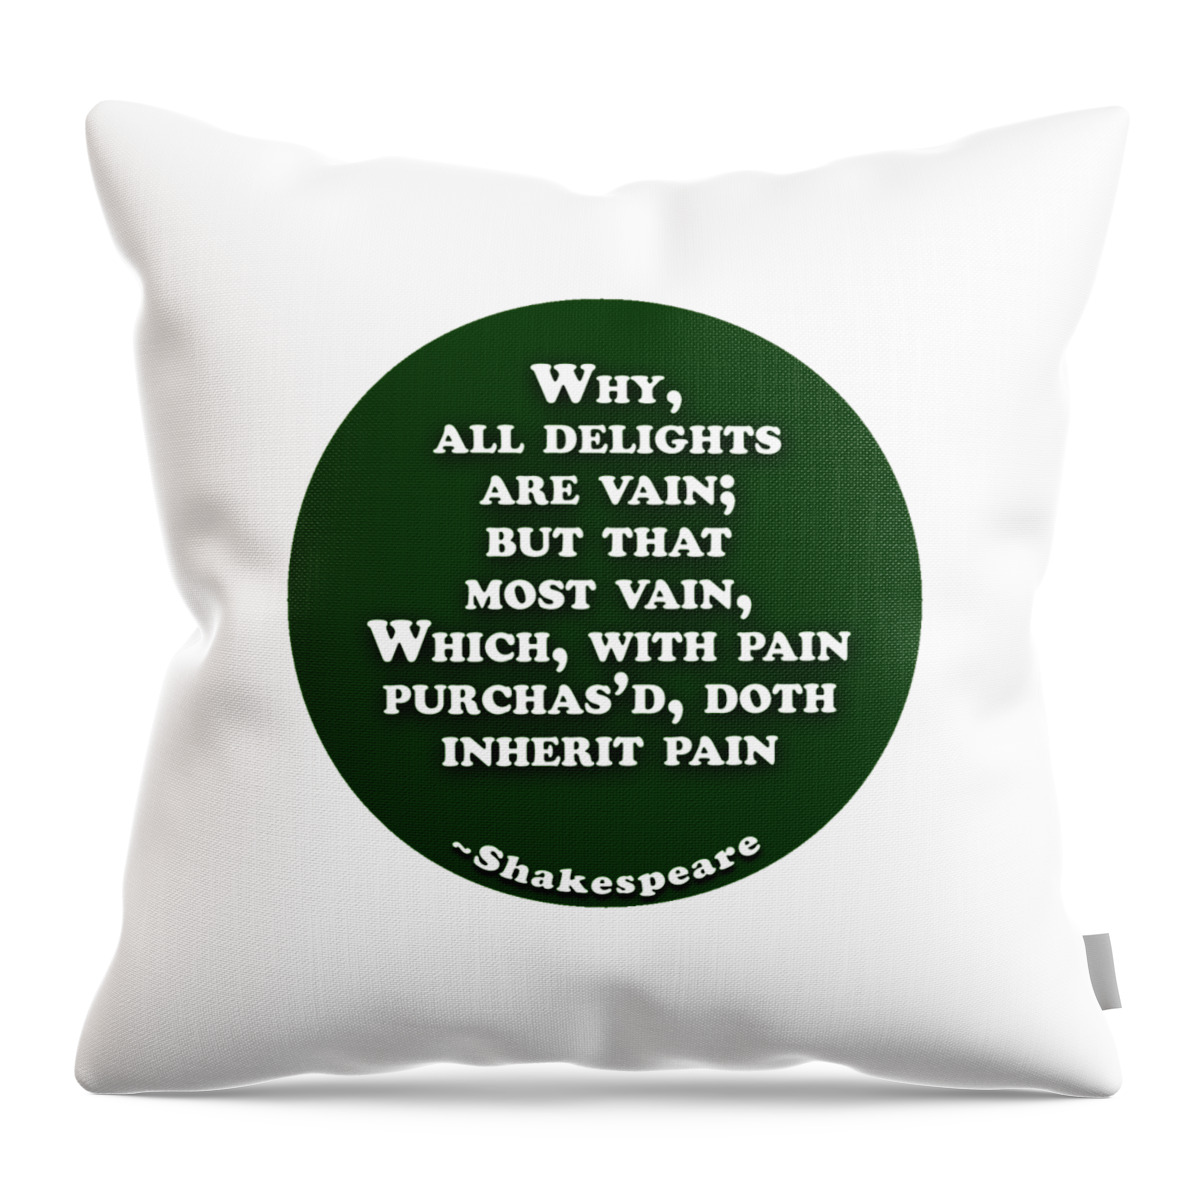 Why Throw Pillow featuring the digital art Why, all delights are vain #shakespeare #shakespearequote by TintoDesigns